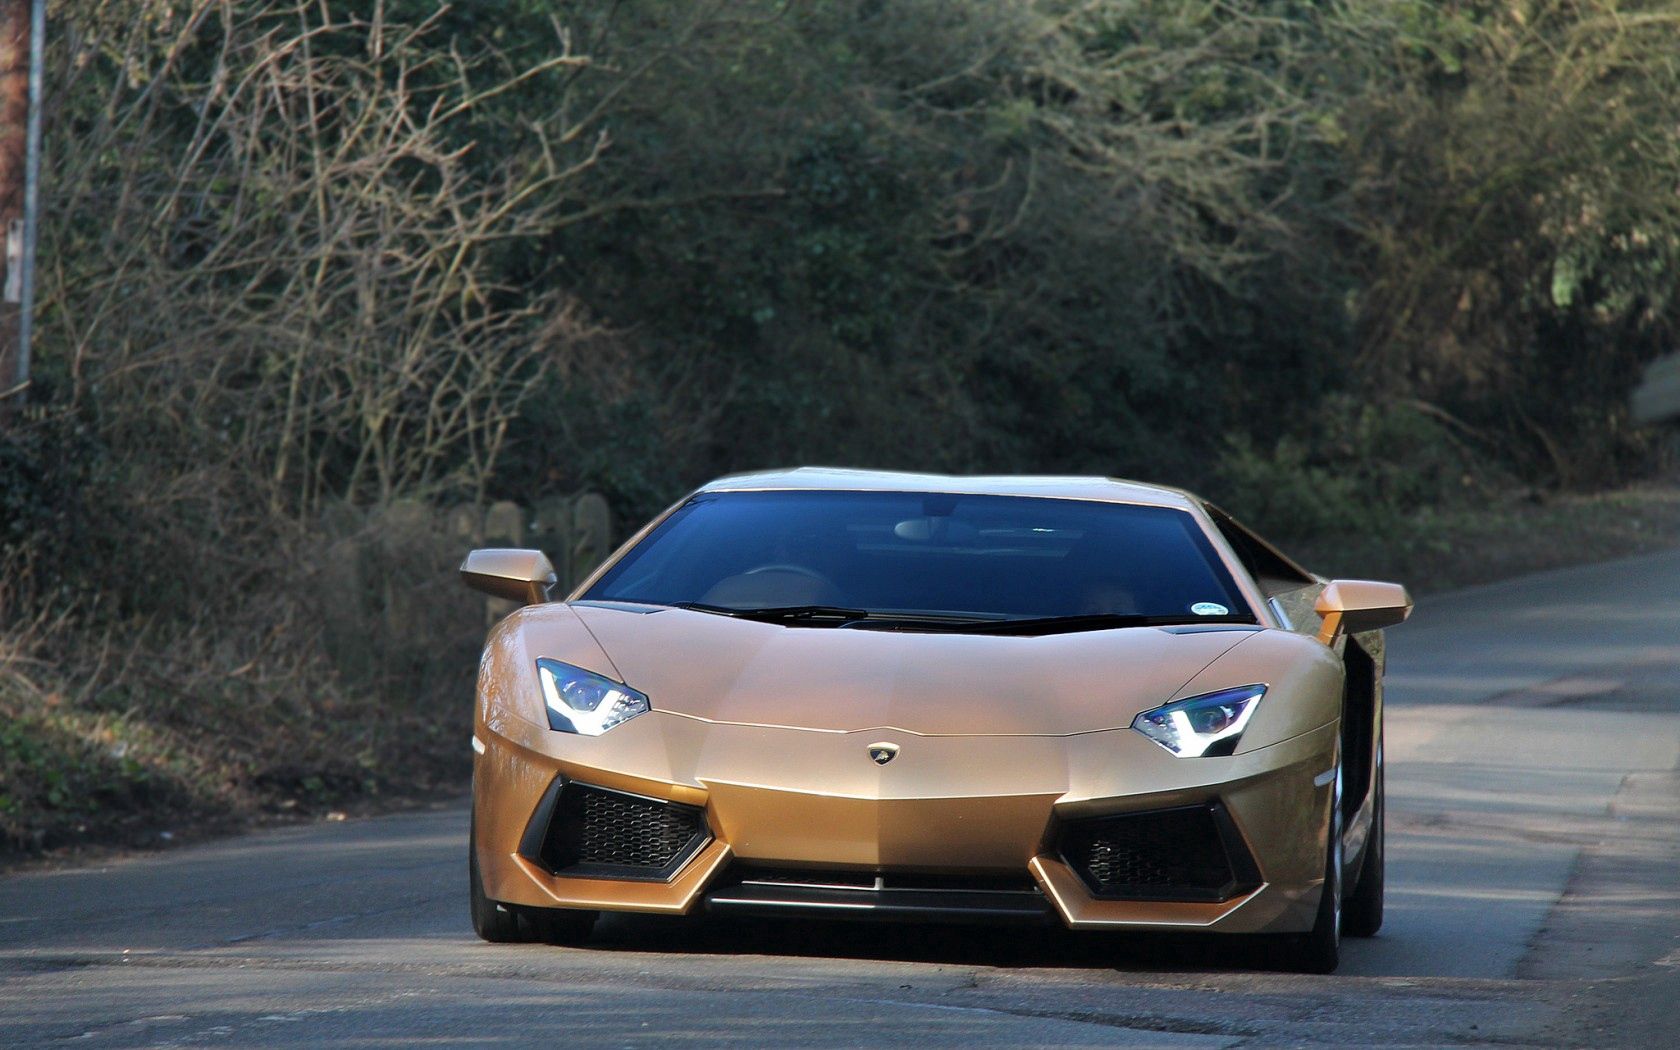 cars, gold, lamborghini, road collection of HD images